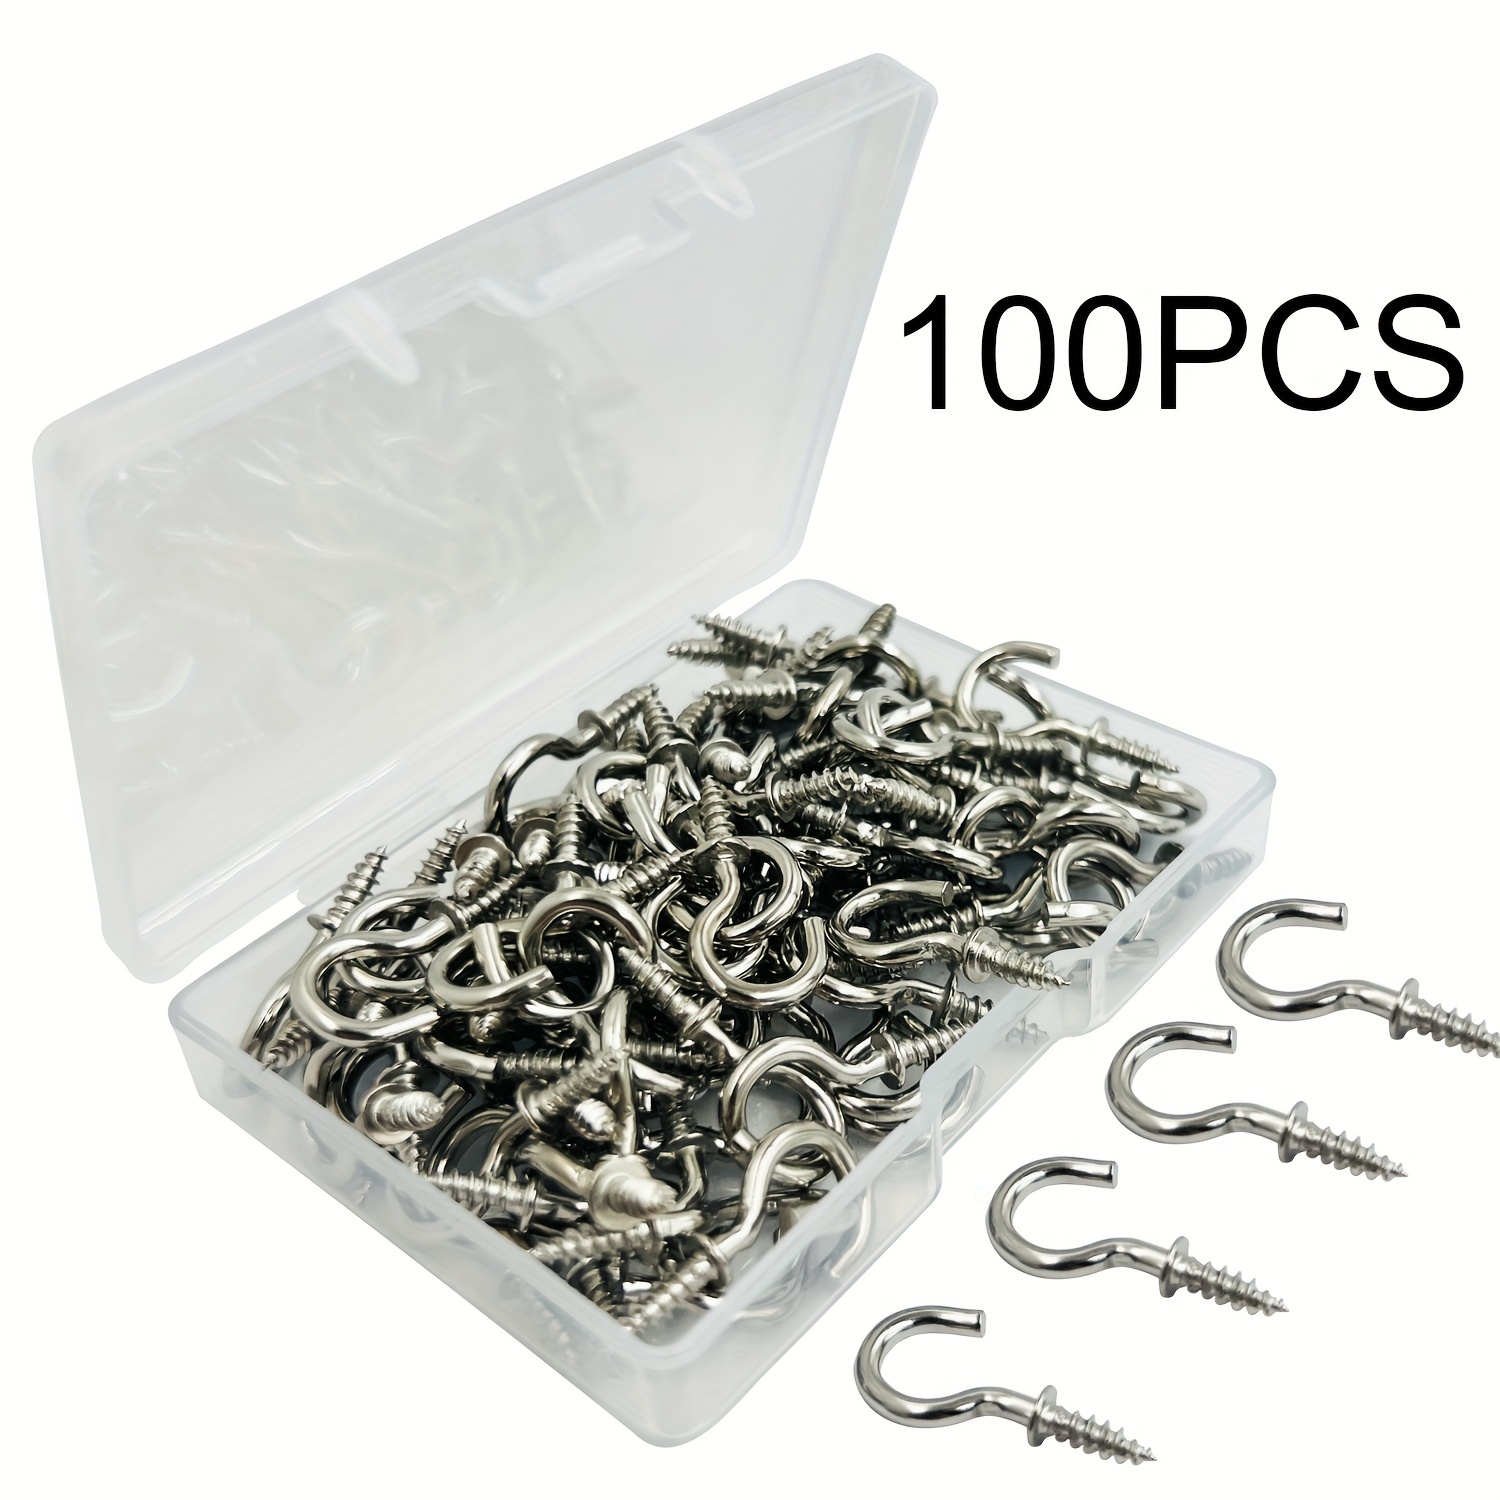 hook screw for ceiling or wall